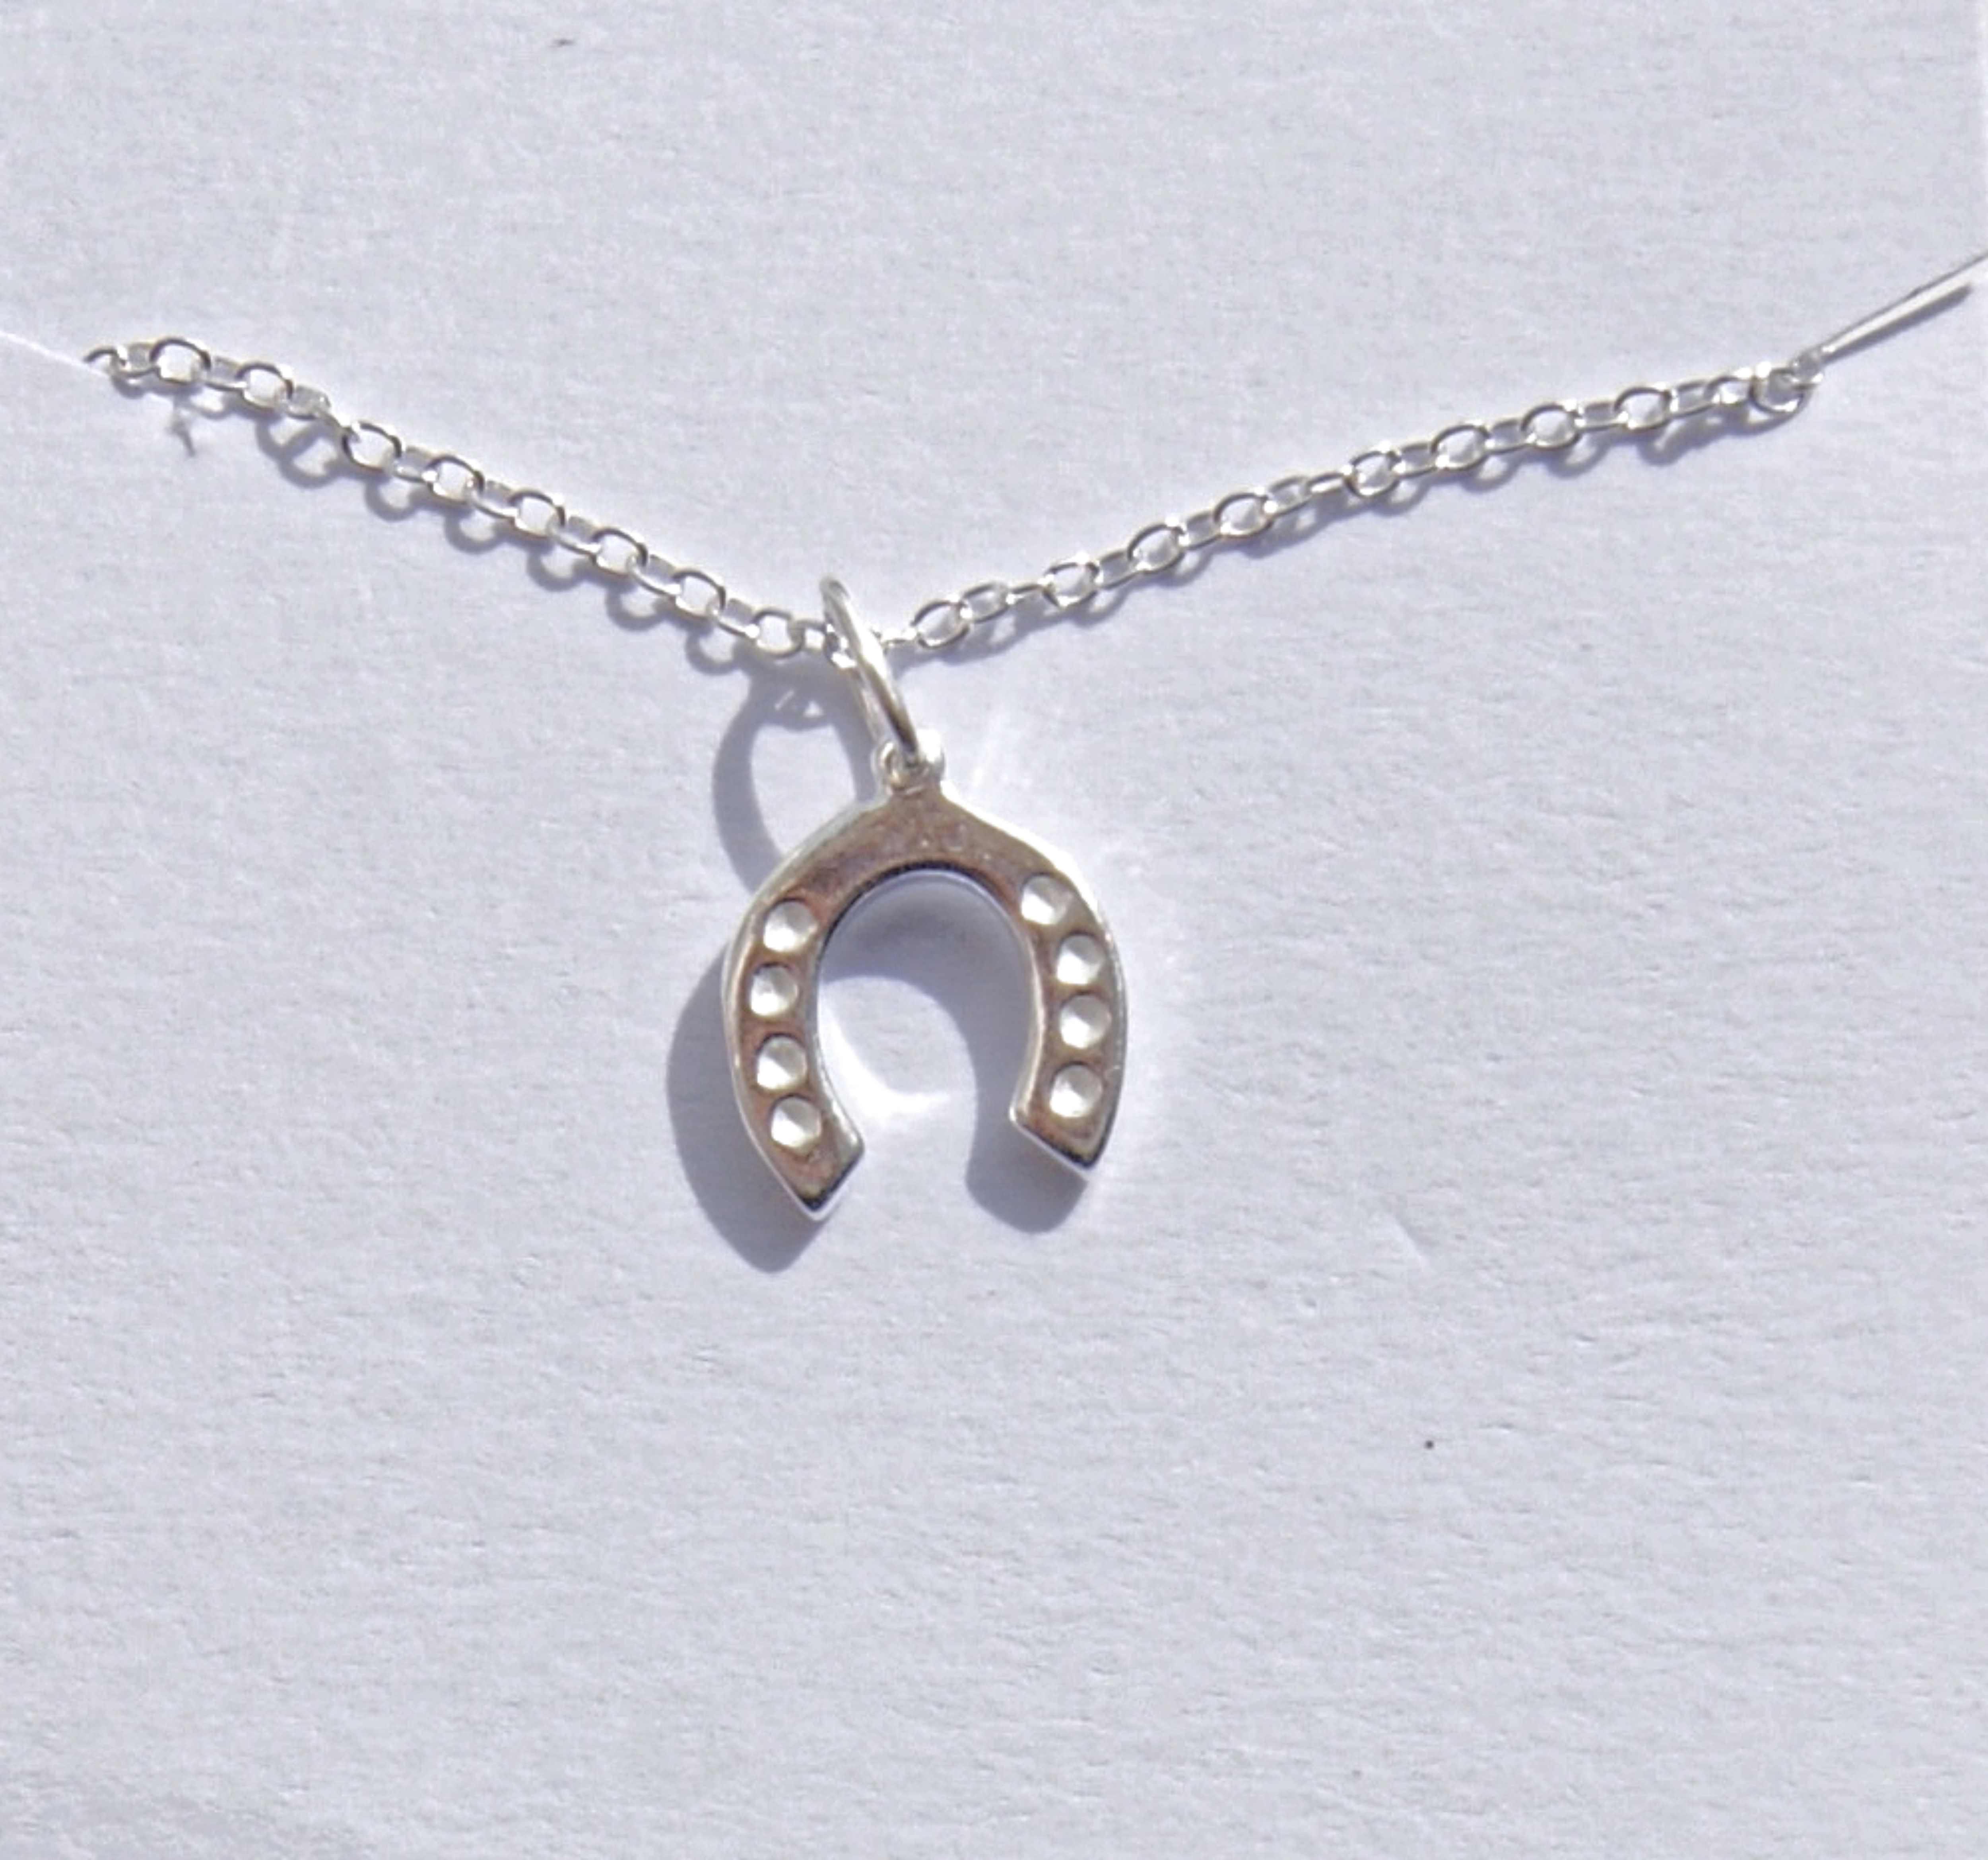 Horseshoe Necklace-Lucky-Sterling Silver: Home of La Juniper - Jewellery